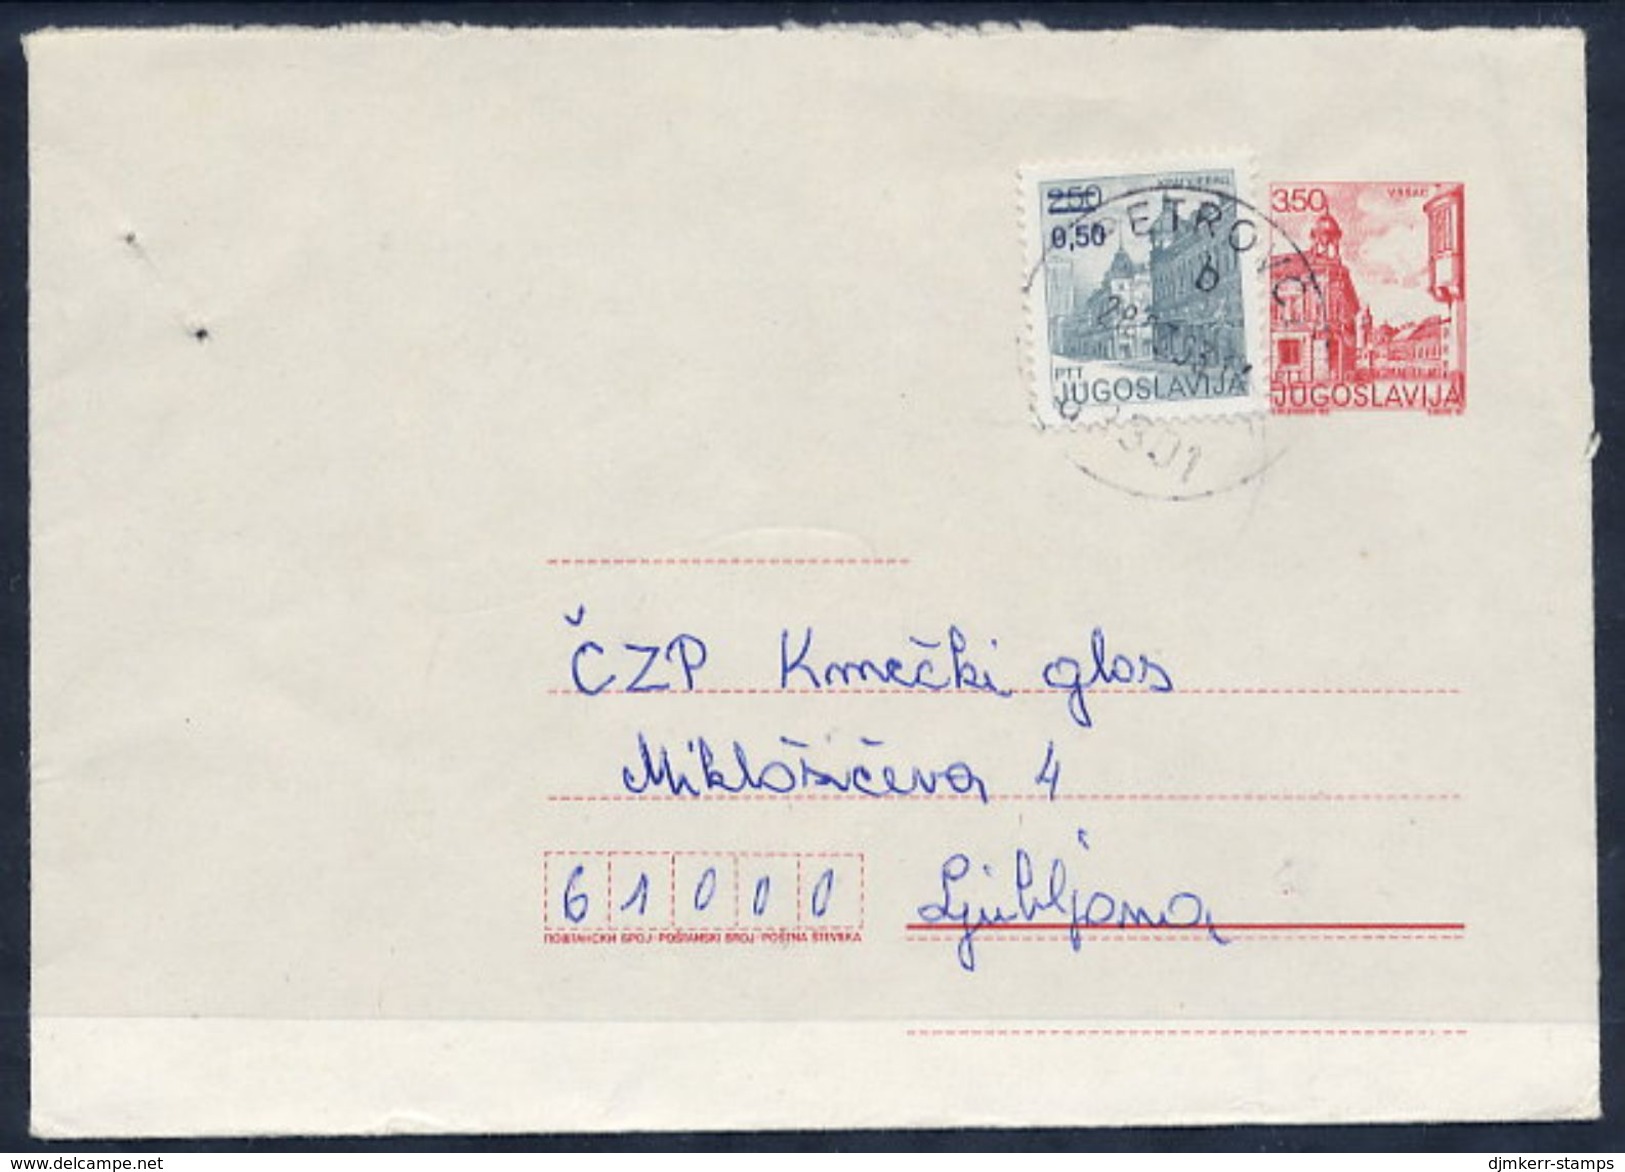 YUGOSLAVIA 1981 Tourism 3.50 D.stationery Envelope Used With Additional Franking.  Michel U63 - Entiers Postaux